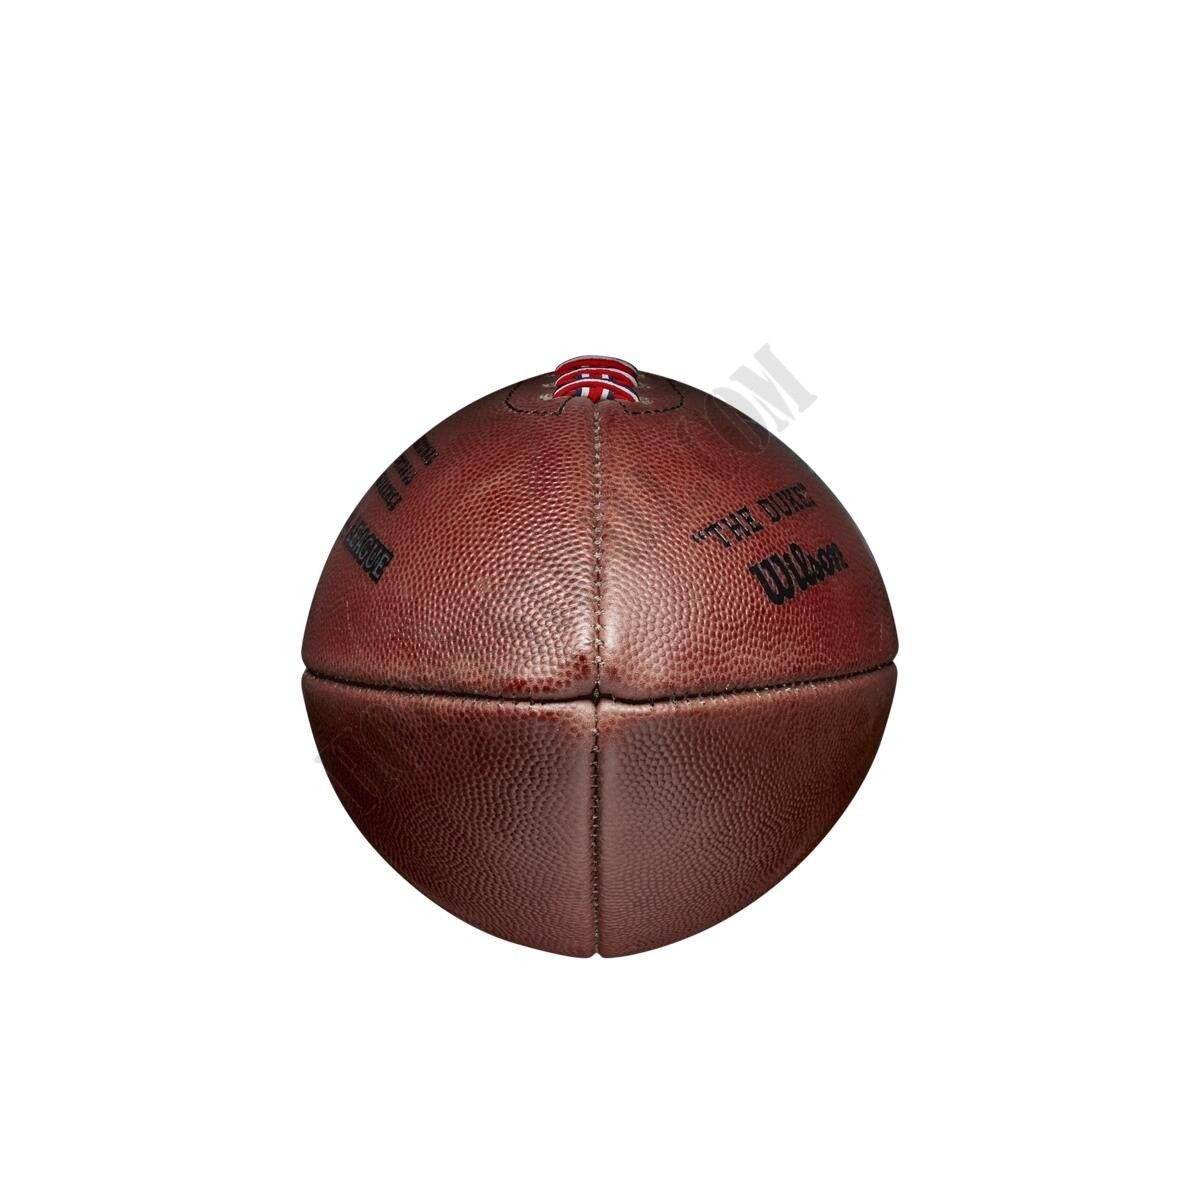 The Duke NFL Football Limited Edition - Wilson Discount Store - -6